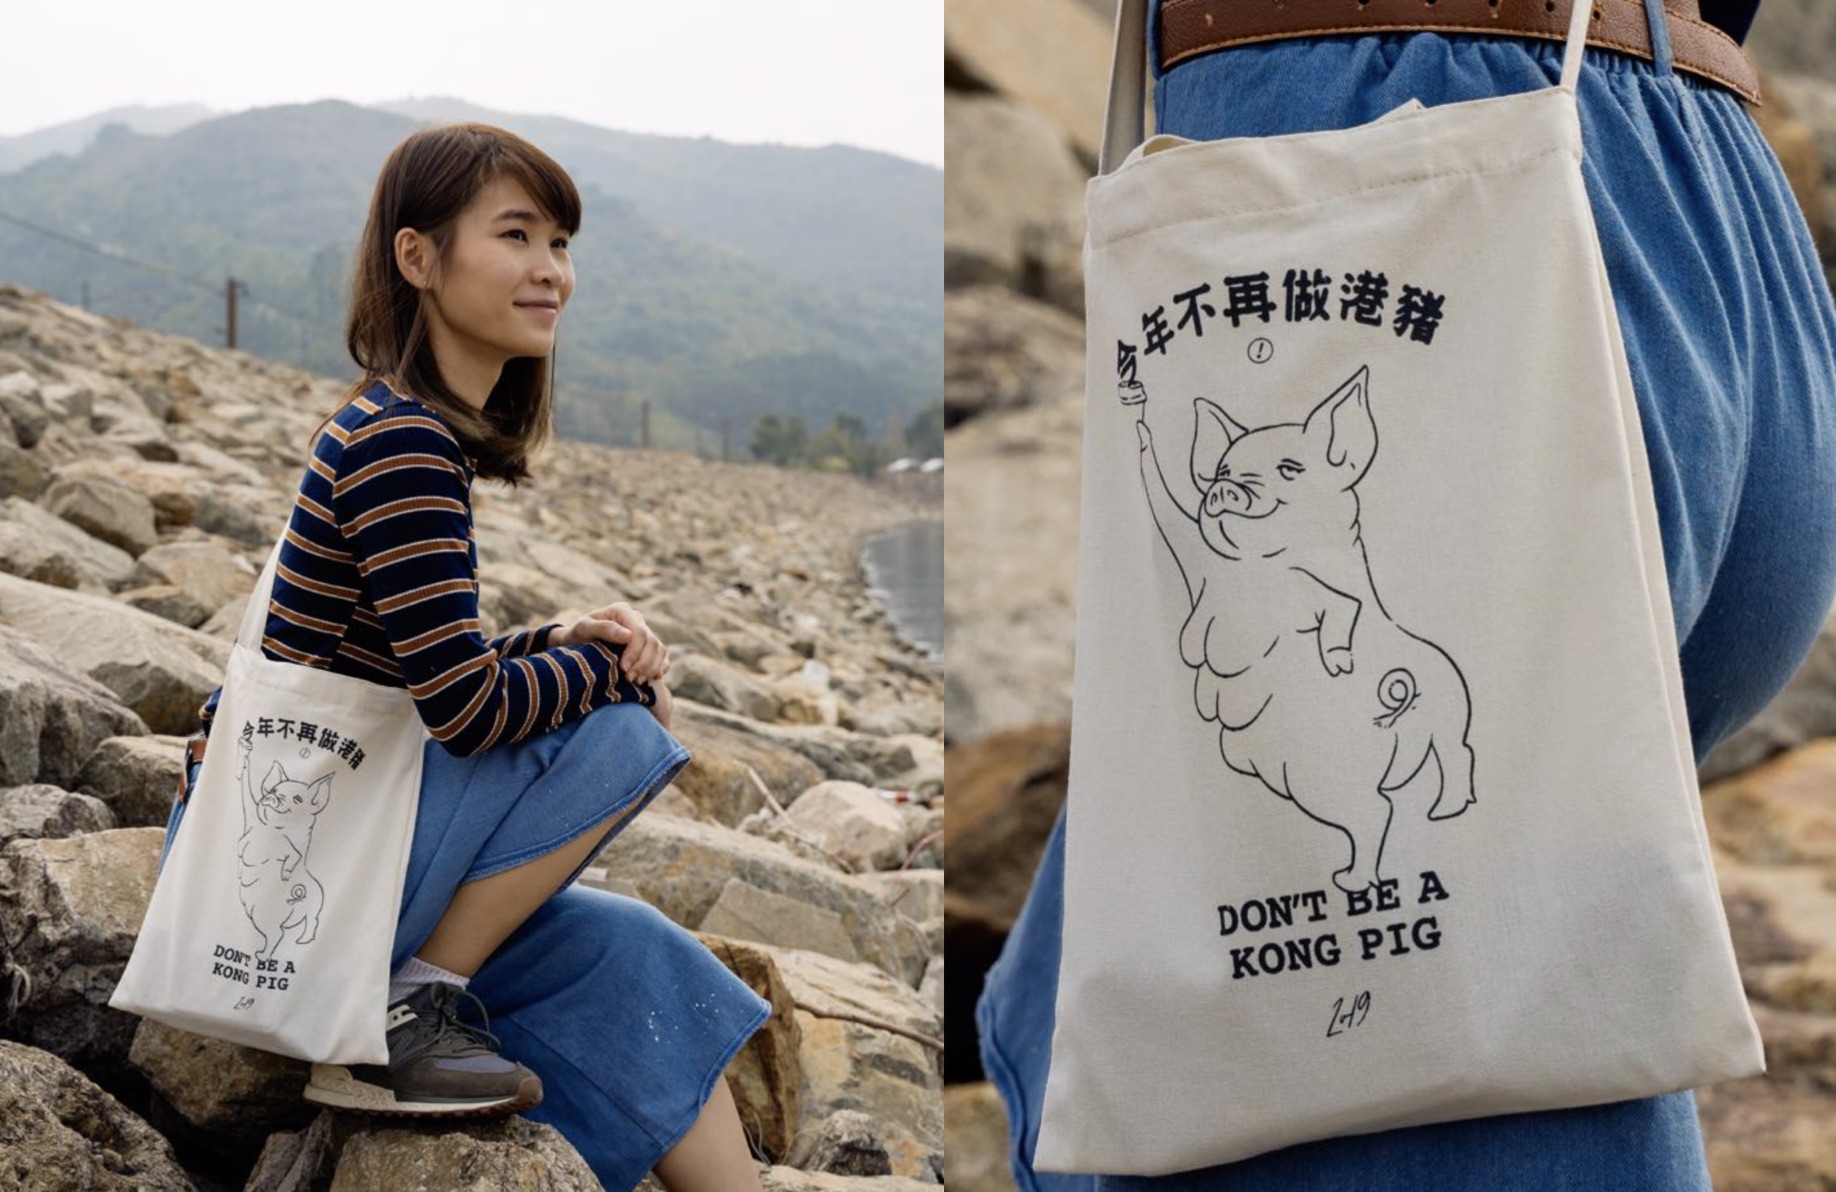 Demosisto had to remove their logo and name from merchandise for the Lunar New Year fair. This includes a tote bag with the phrase “don’t be a kong pig” written on it. Photos via Facebook/Demosisto.